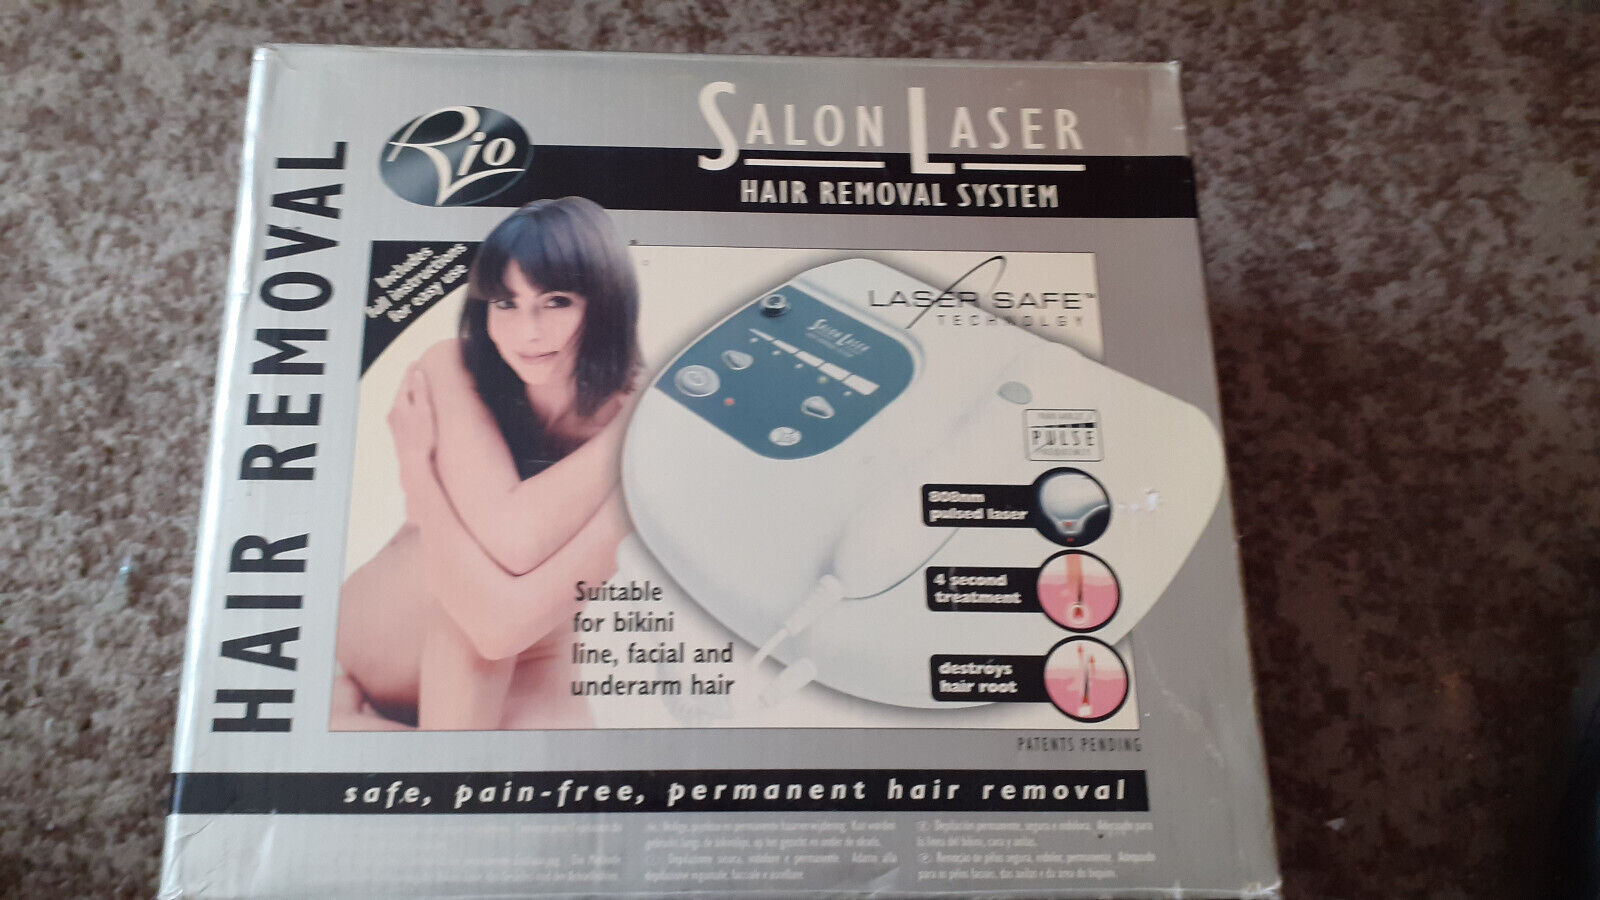 Rio Salon Laser Hair Removal with Instructions & DVD